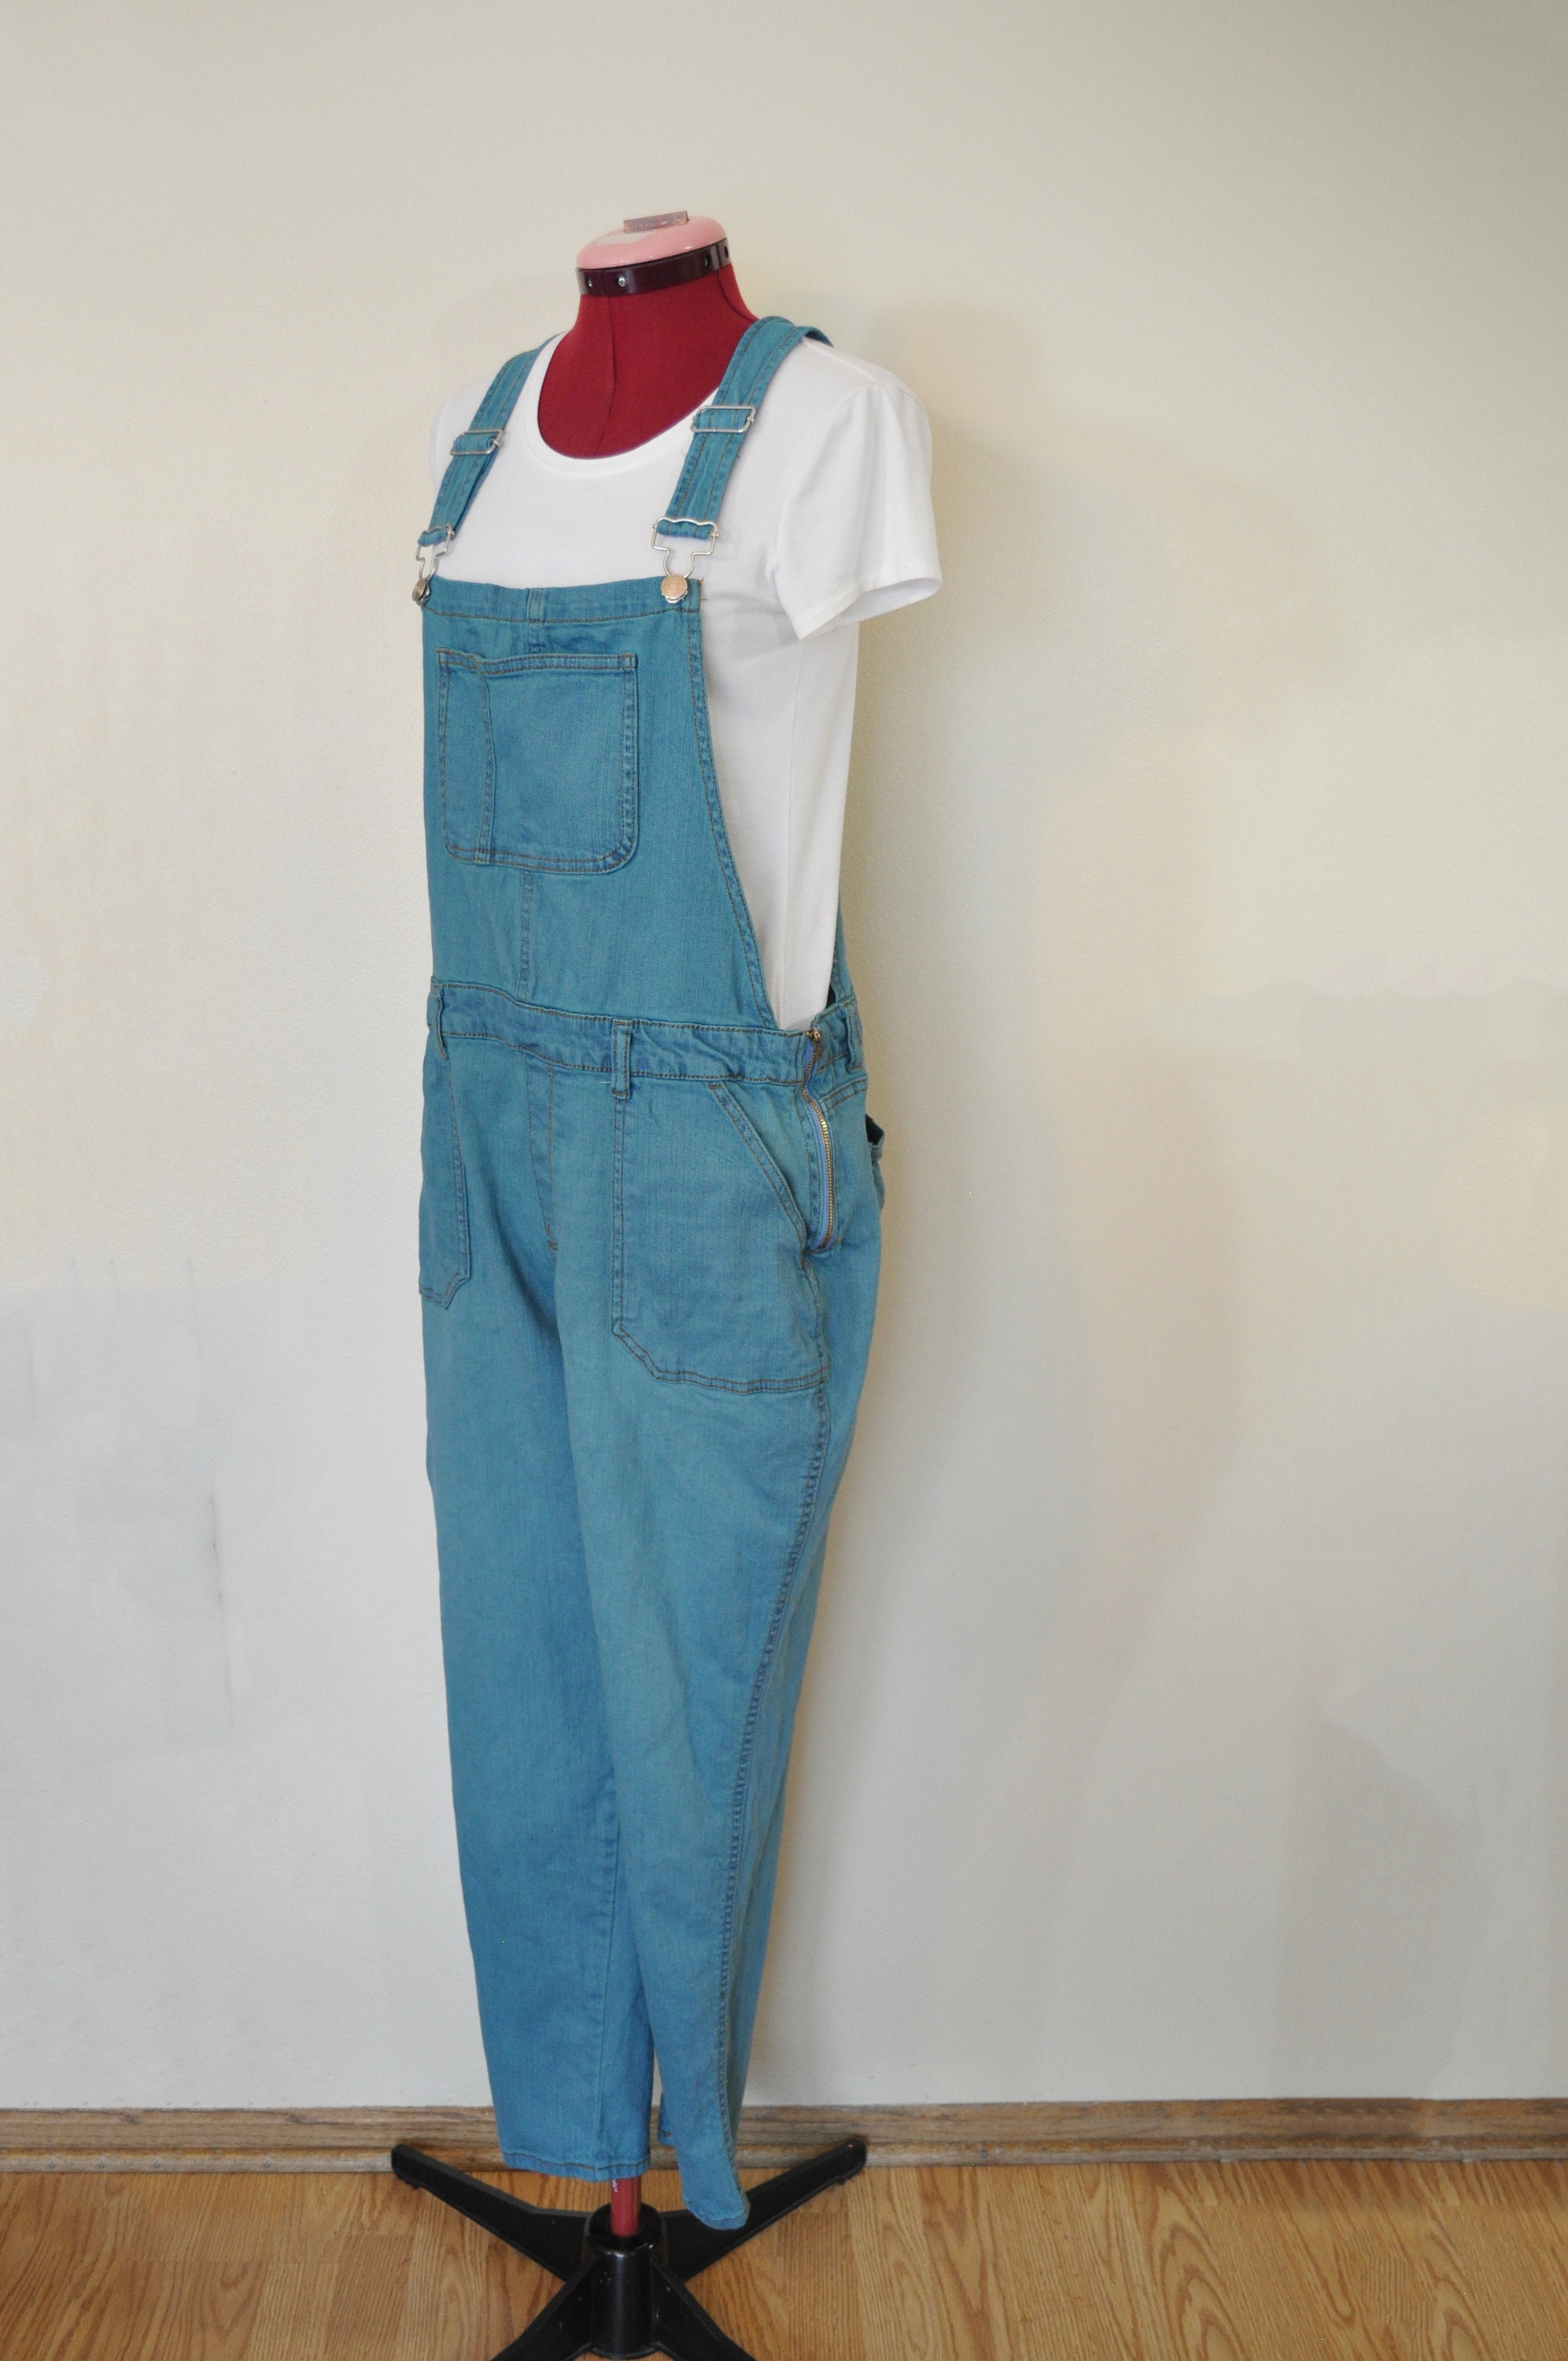 Teal 15/17 XL Bib OVERALL Pants Aqua Green Dyed Upcycled No Boundaries  Cotton Denim Overalls Adult Women Juniors Extra Large 38W X 29L 